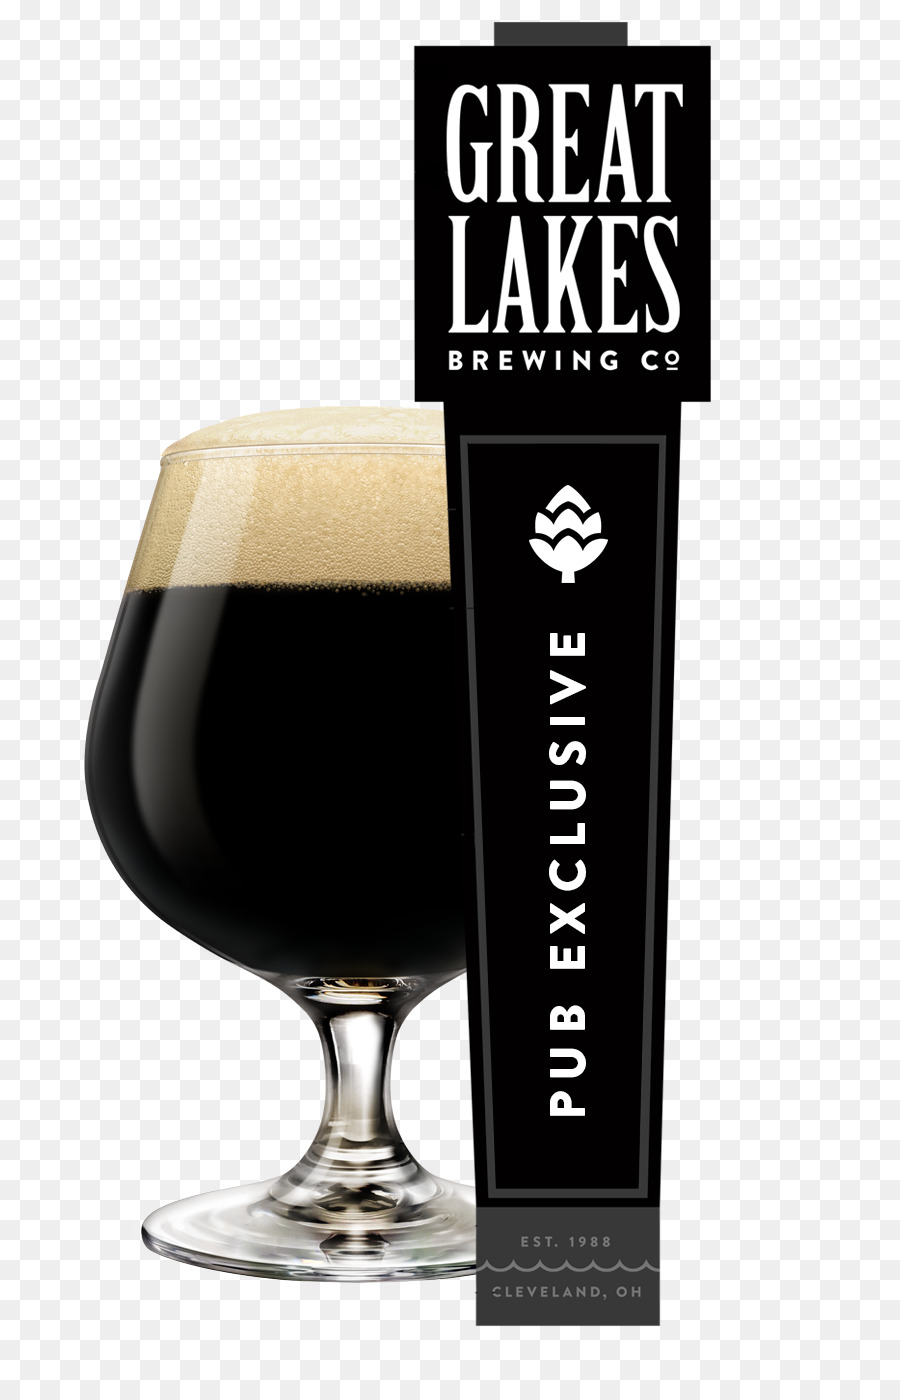 Stout Great Lakes Brewing Company Lagerbier Dortmunder Export - Bier